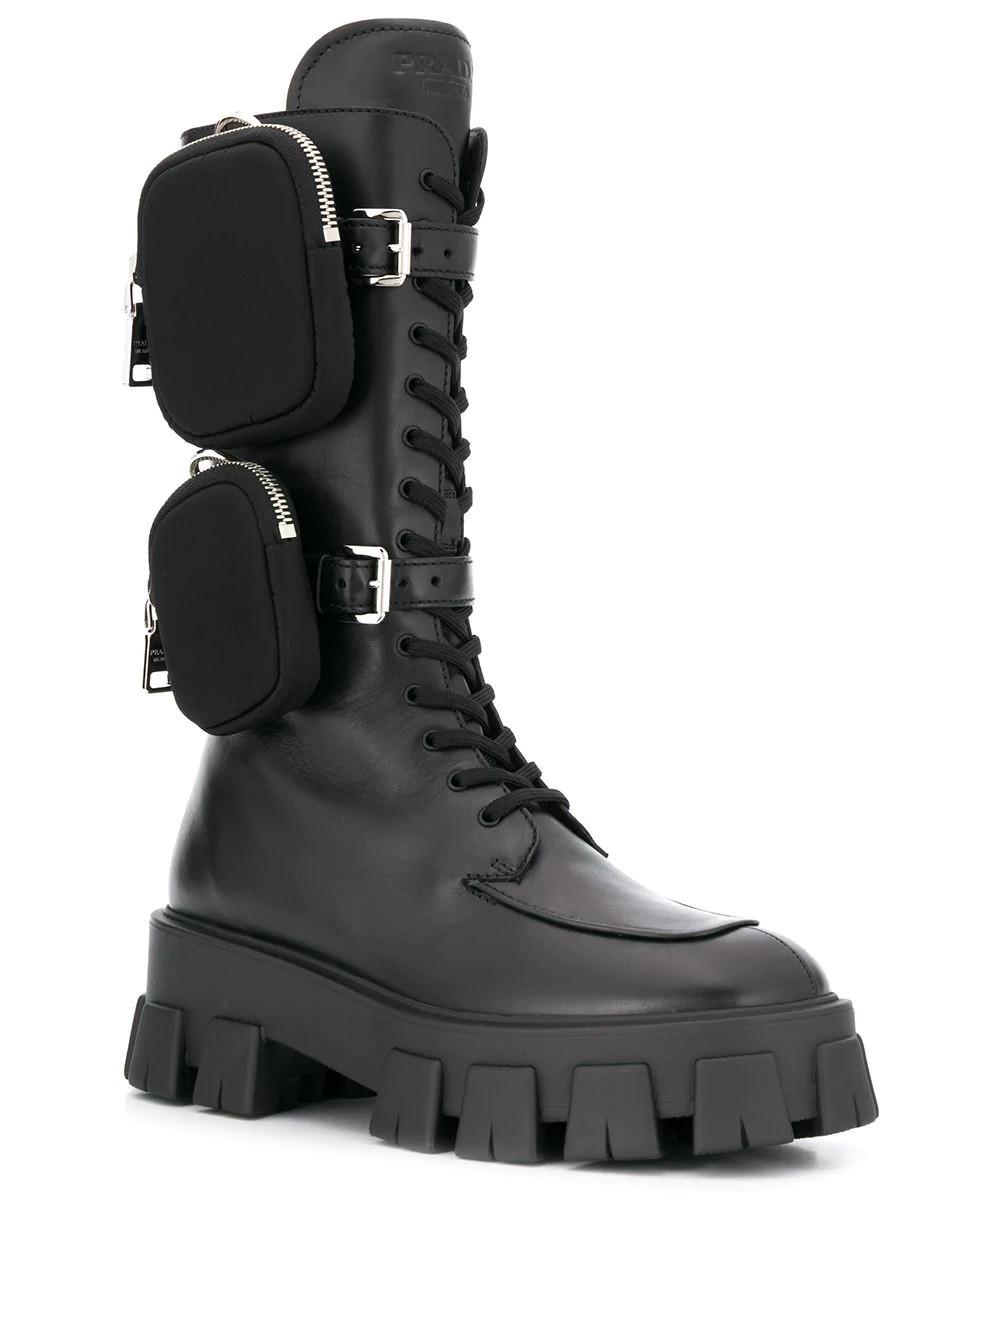 Prada Leather Monolith Chunky Boots in Black - Lyst